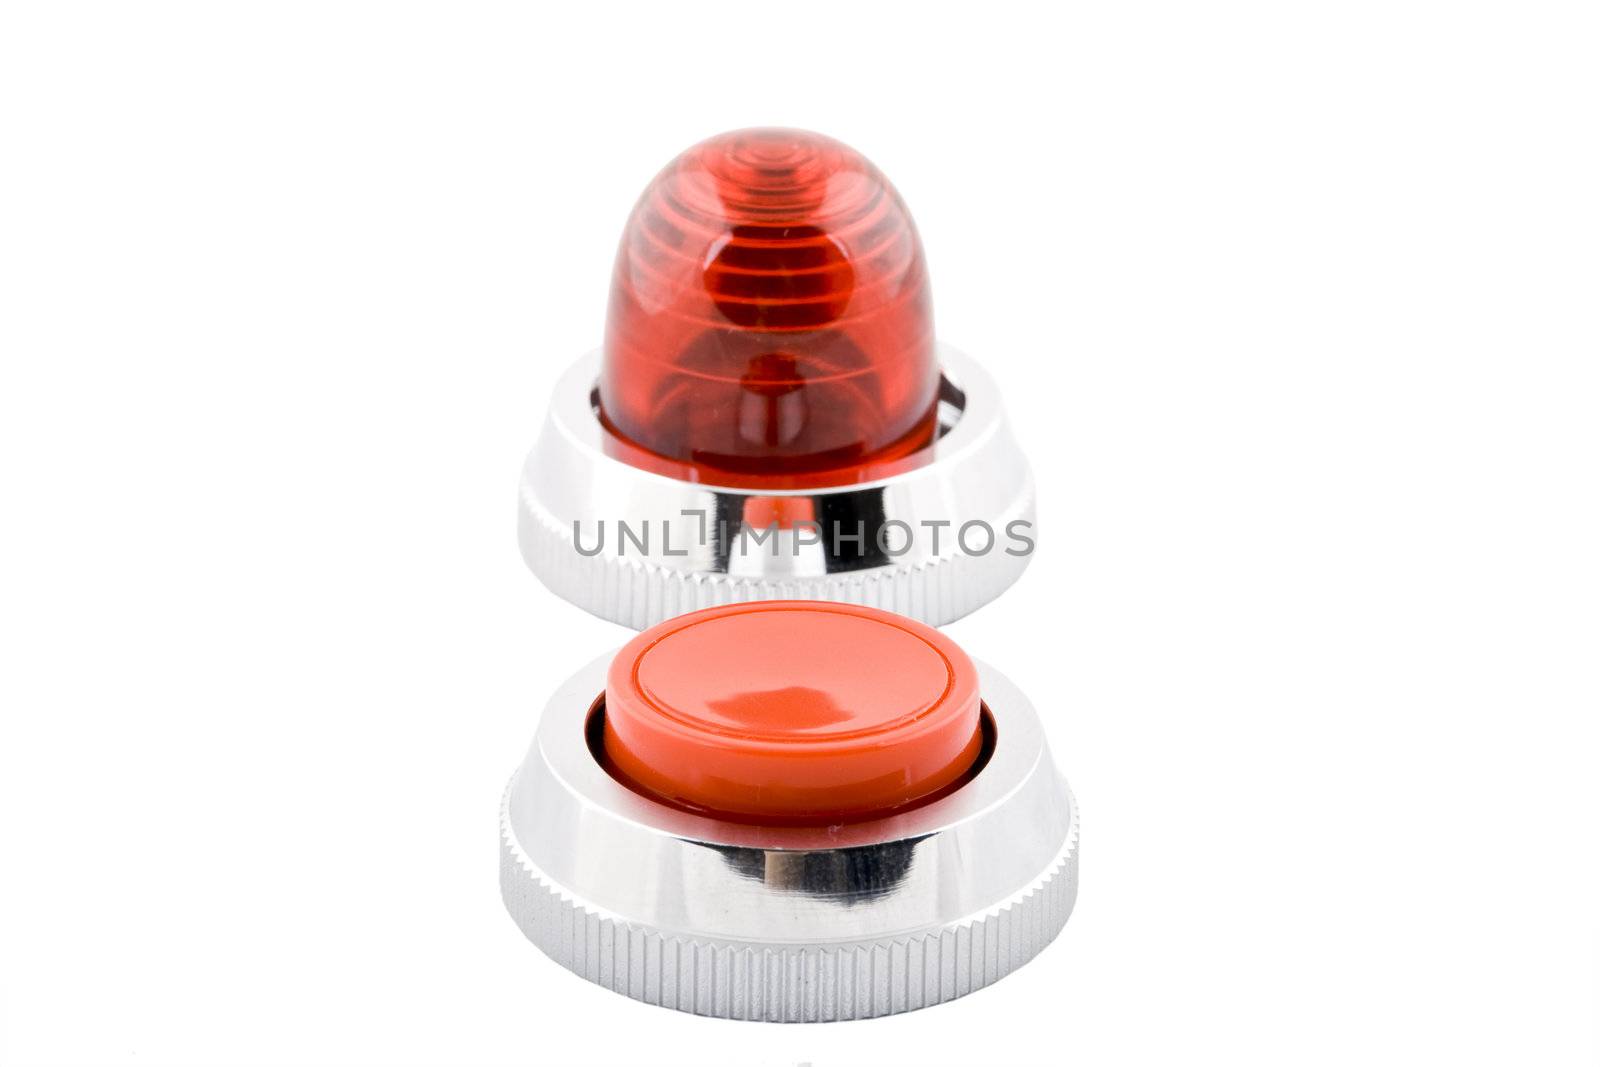 Power button and status indicator light by yuyang